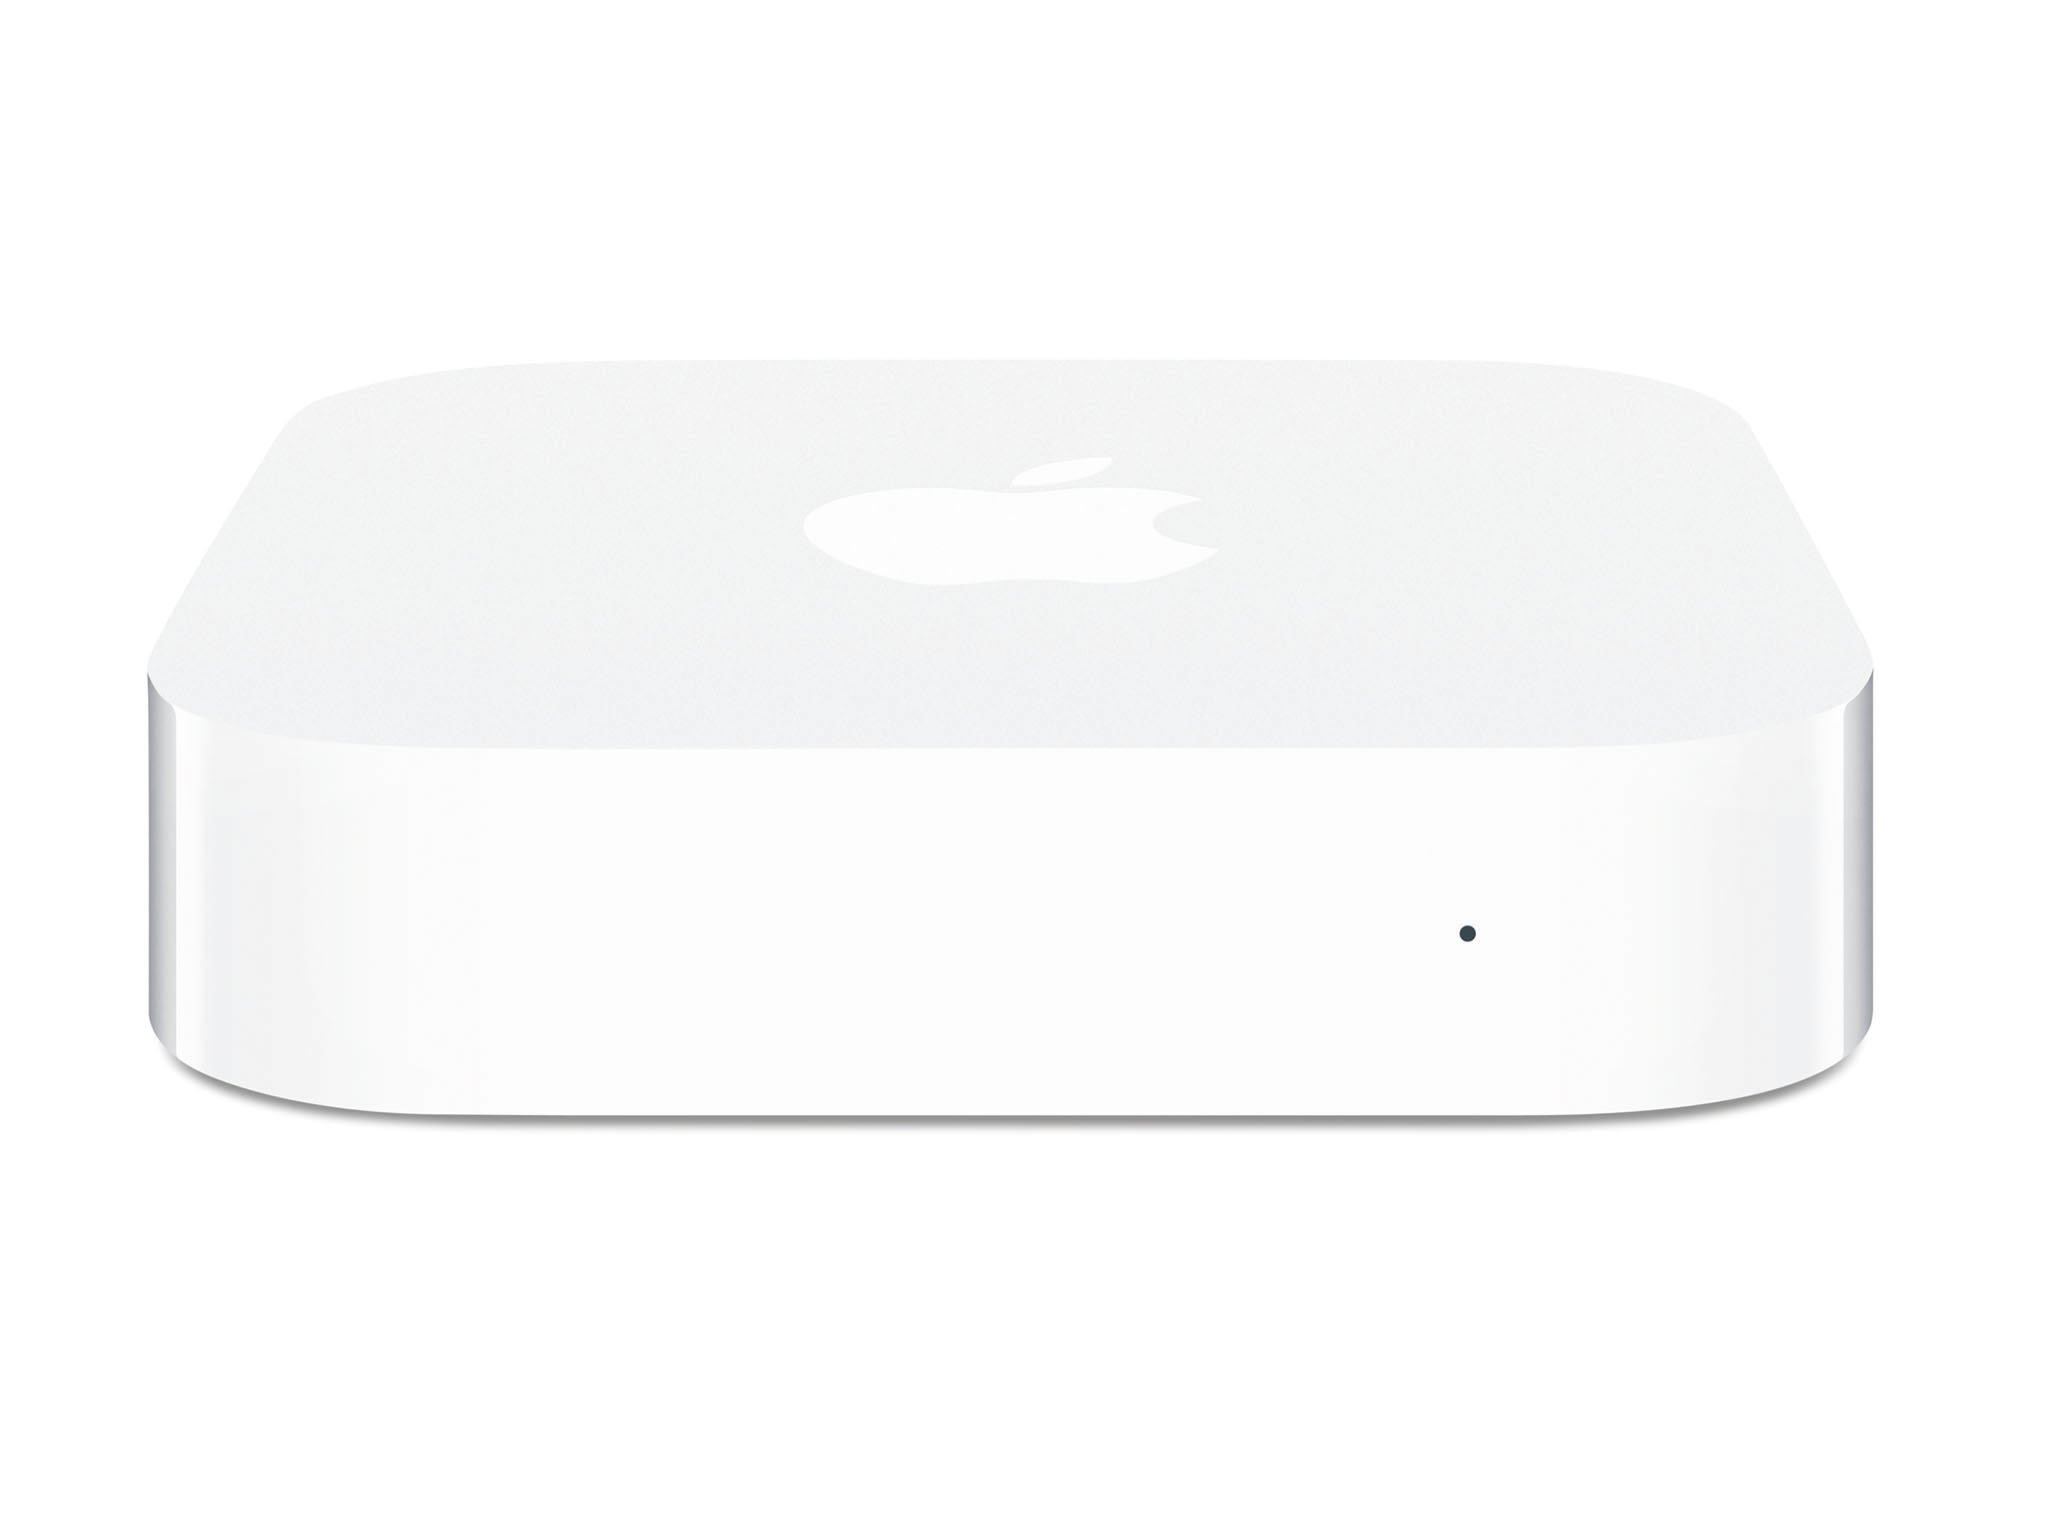 hook up airport express to receiver